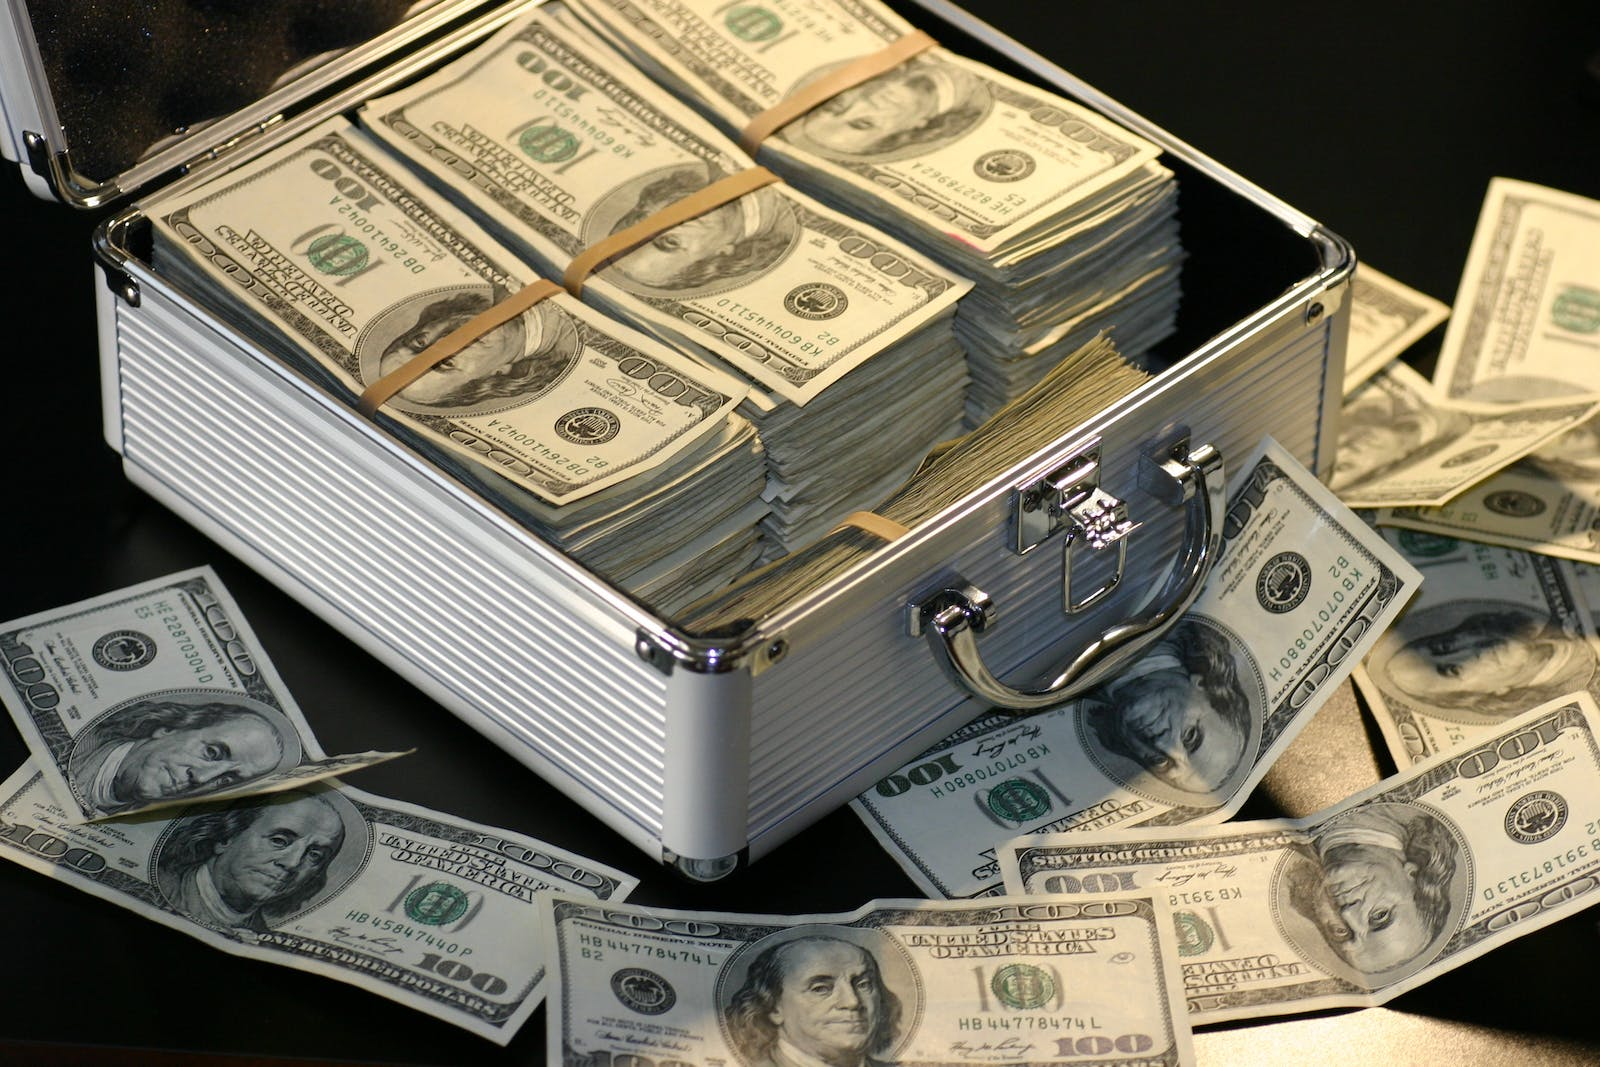 Stacks Of Cash Highlights The Cases Of Money Laundering Associated With The Notorious Gangster.